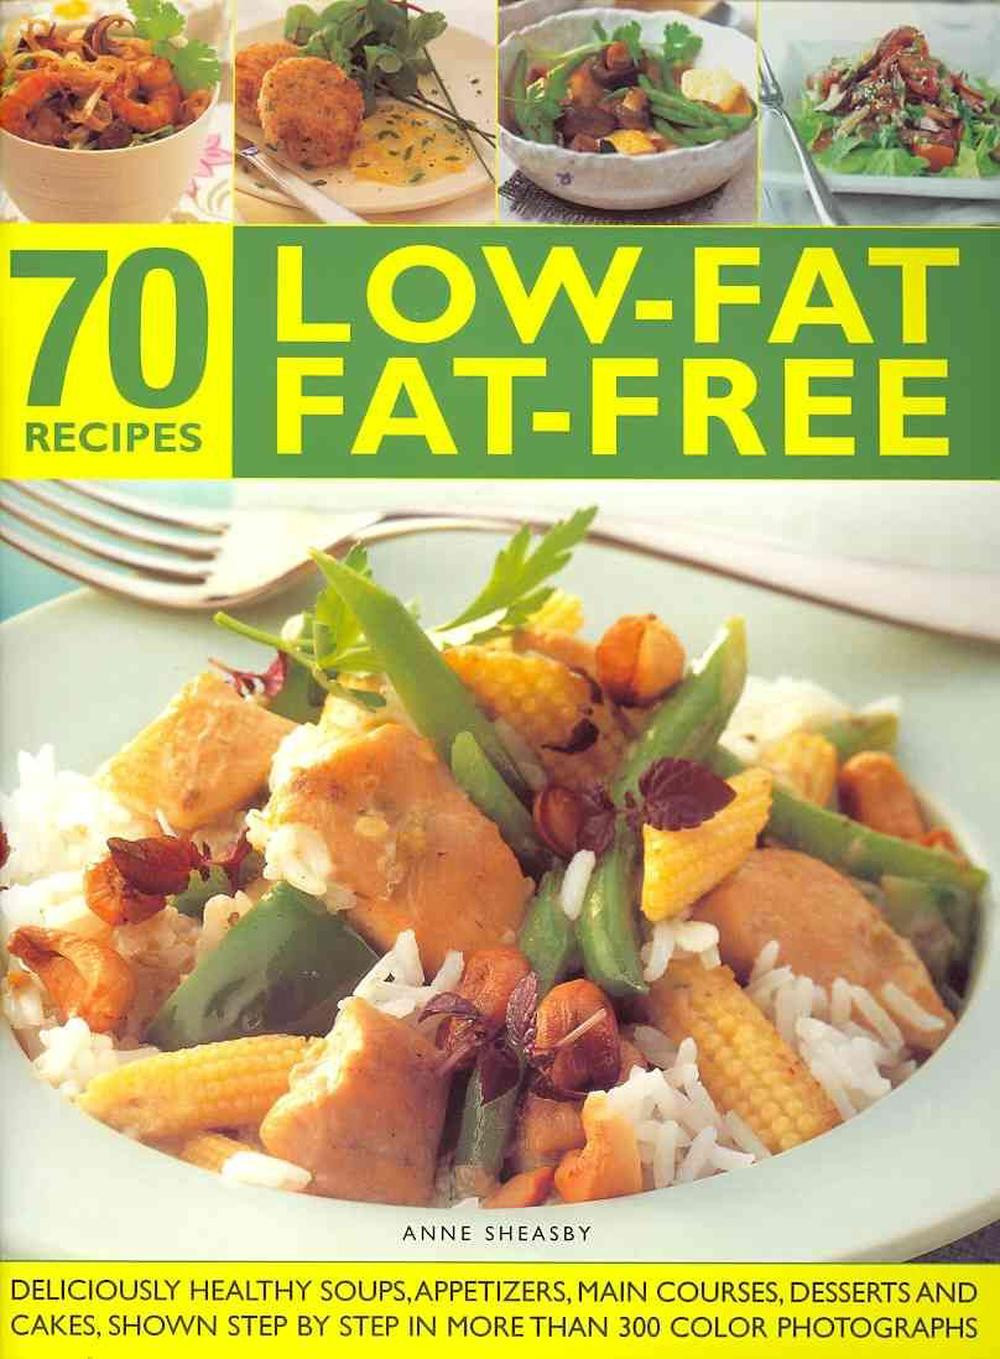 Low Fat Appetizer Recipes
 70 Low Fat Fat Free Recipes Deliciously Healthy Soups